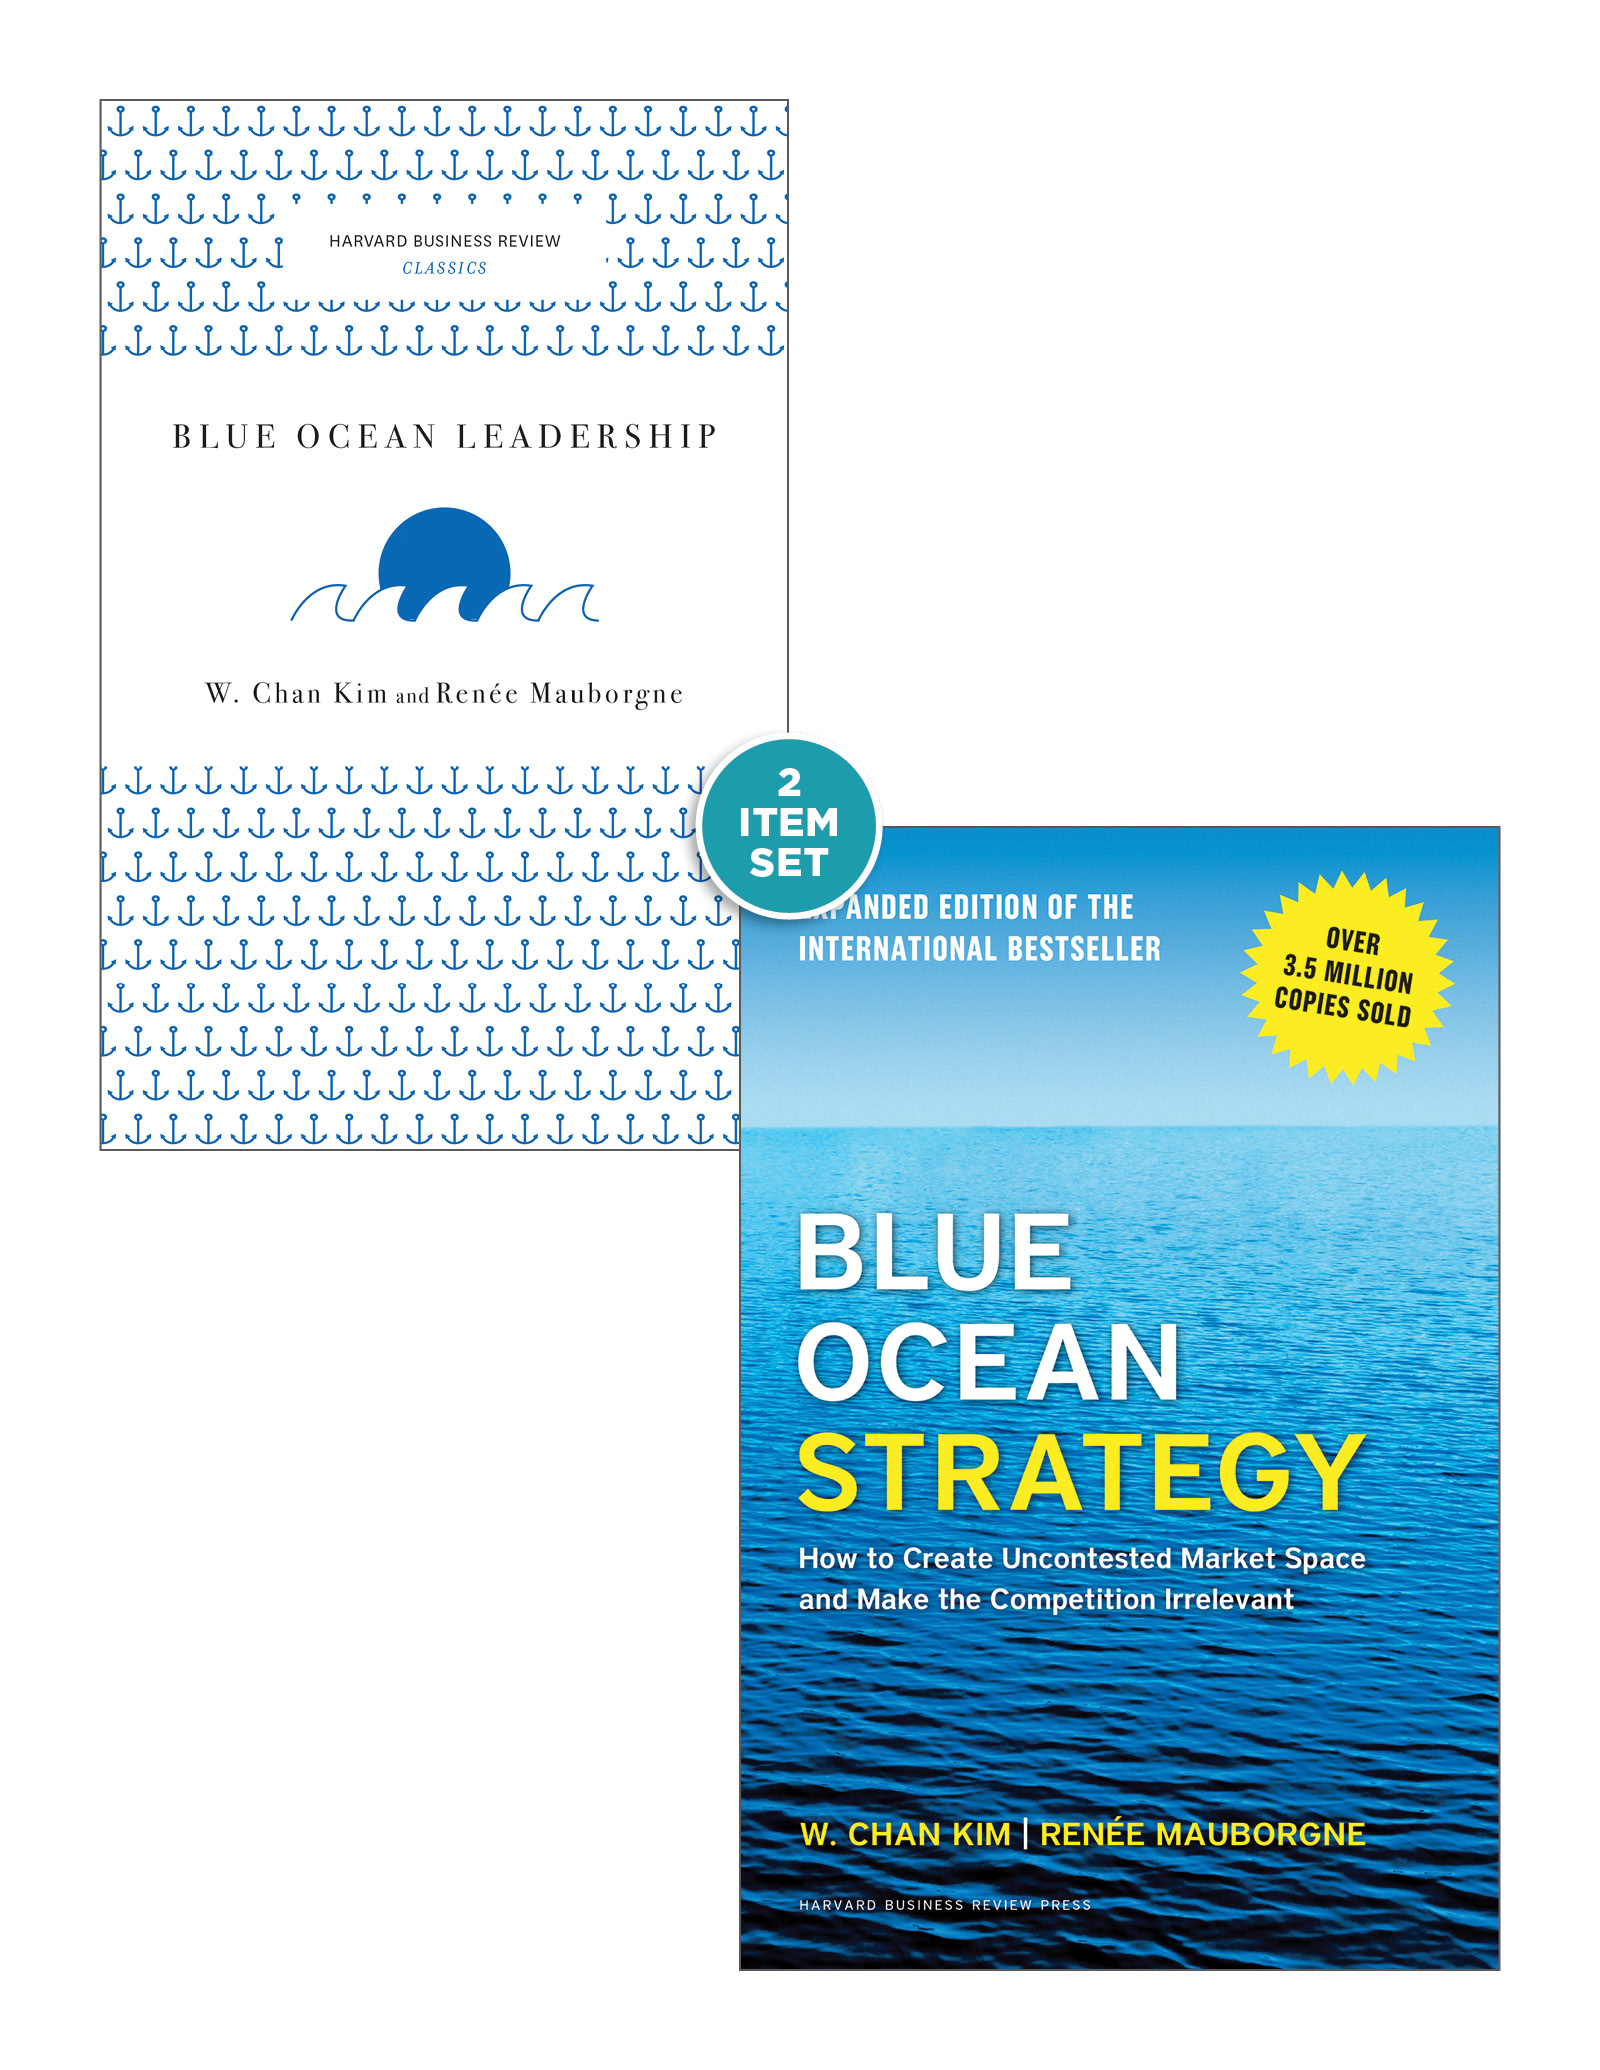 Blue Ocean Strategy with Harvard Business Review Classic Article "Blue Ocean Leadership" (2 Books)